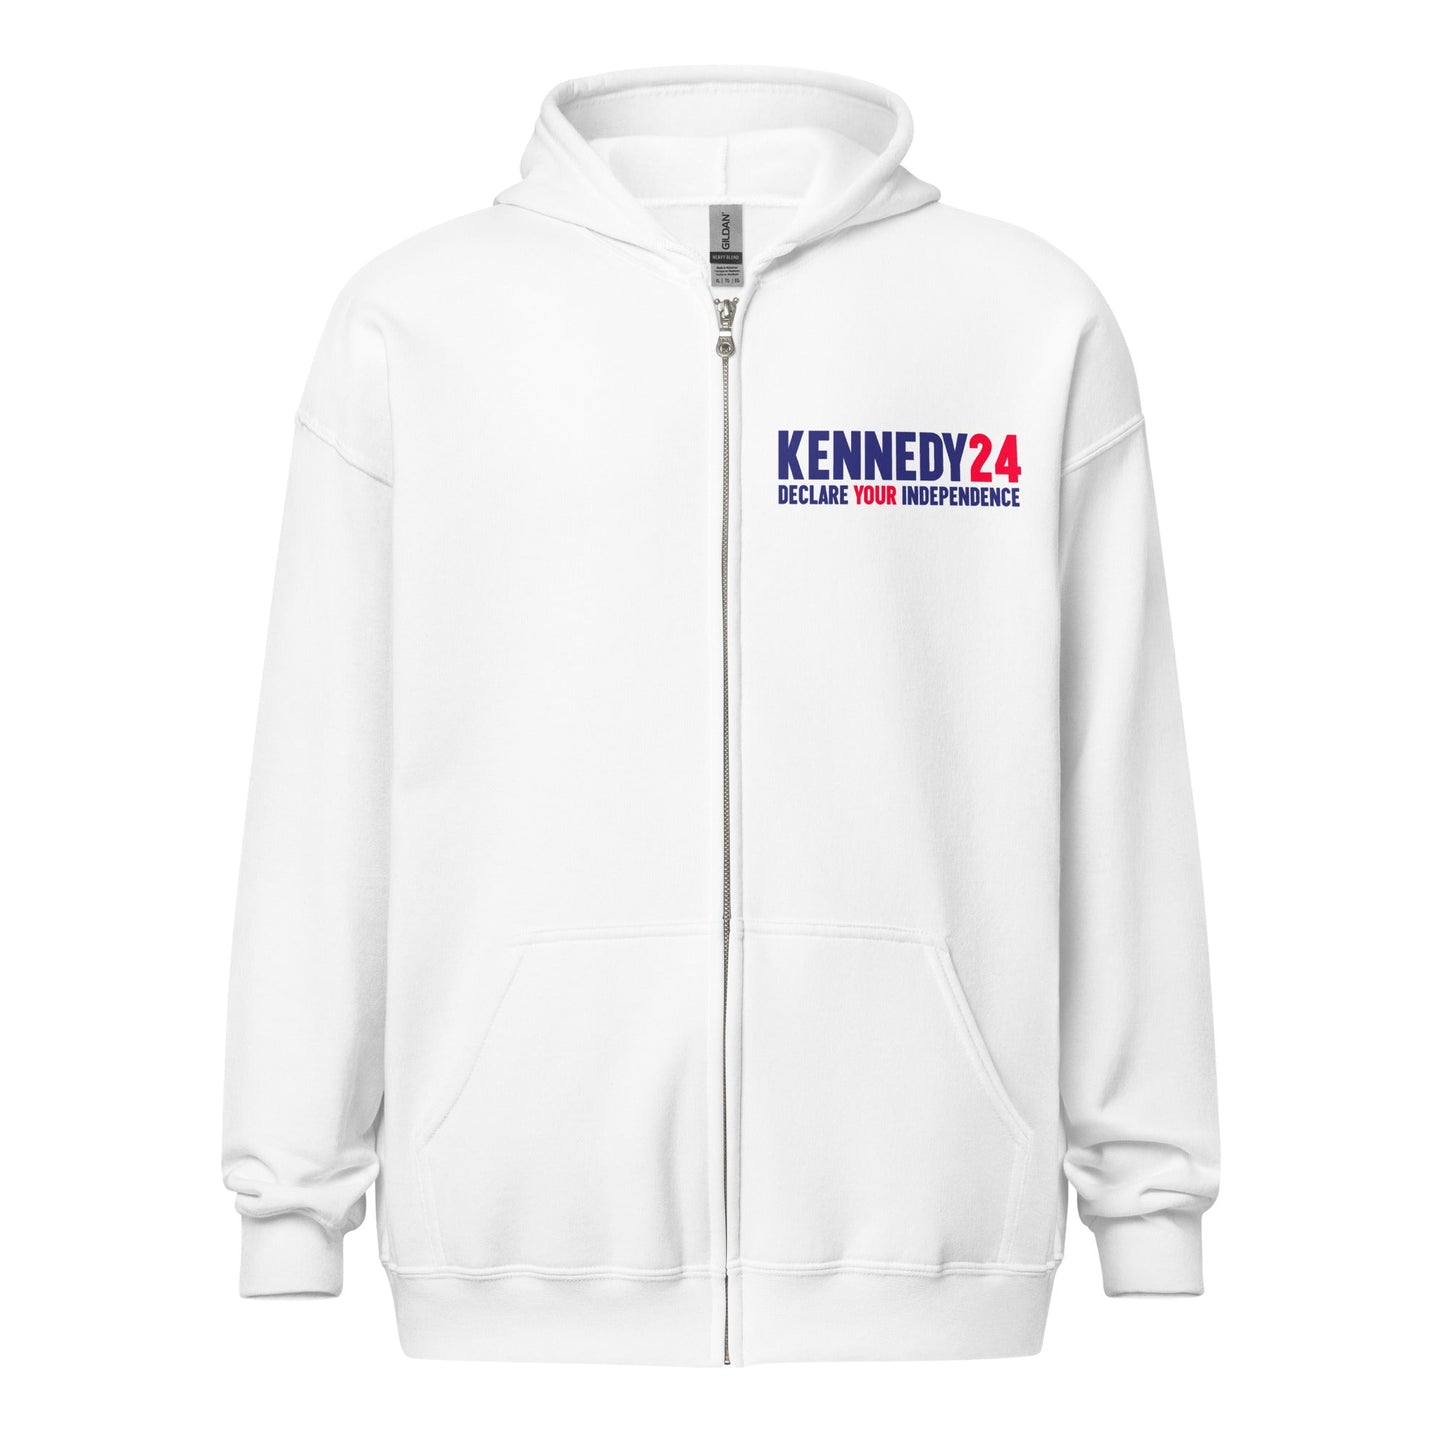 Declare Your Independence Kennedy for President Unisex Zip Hoodie - TEAM KENNEDY. All rights reserved